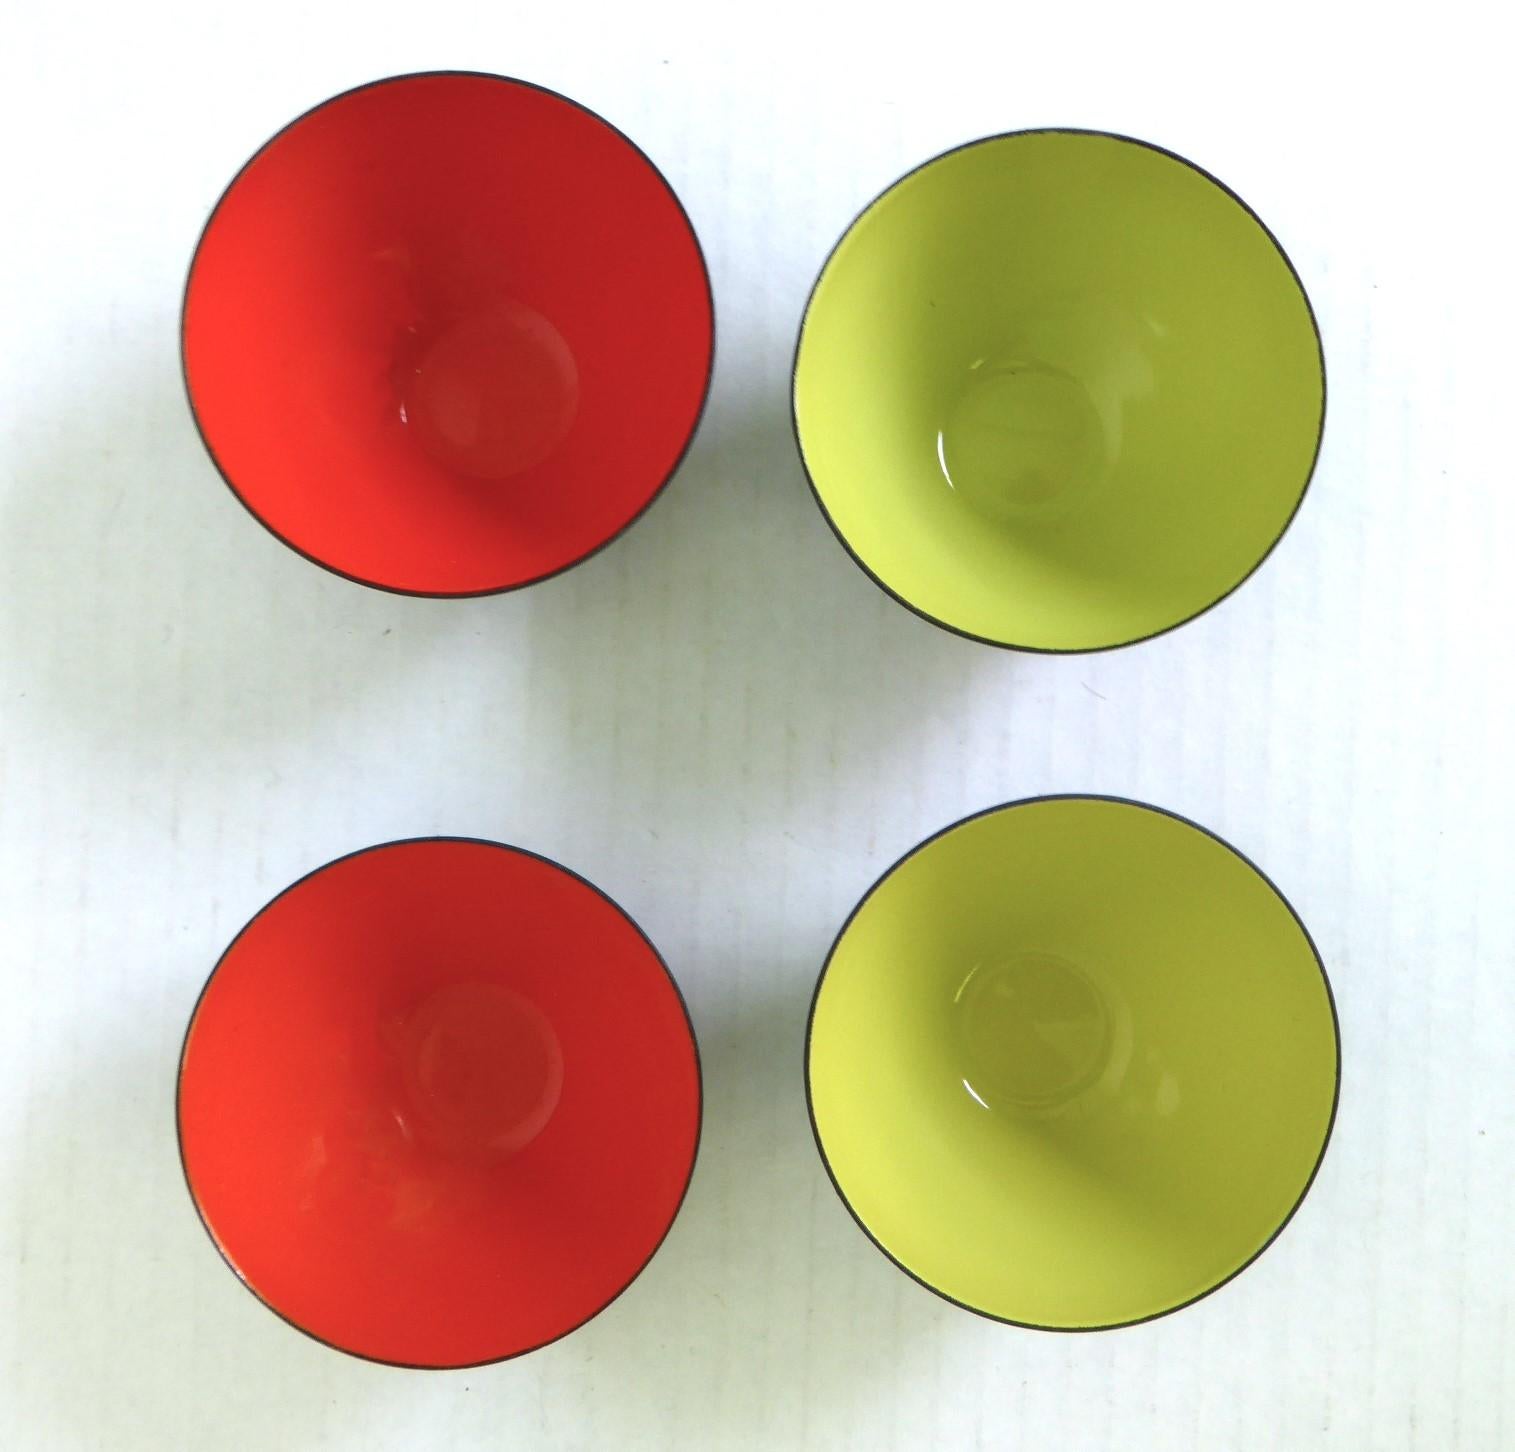 Herbert Krenchel designed hard to find 1950s vintage set of 4 Krenit smallest bowls, 1.50 inches height by 3.5 inches diameter, produced and marketed by Torben Orskov of Denmark.   Two with in tomato red and two with the lime green enamel. All in